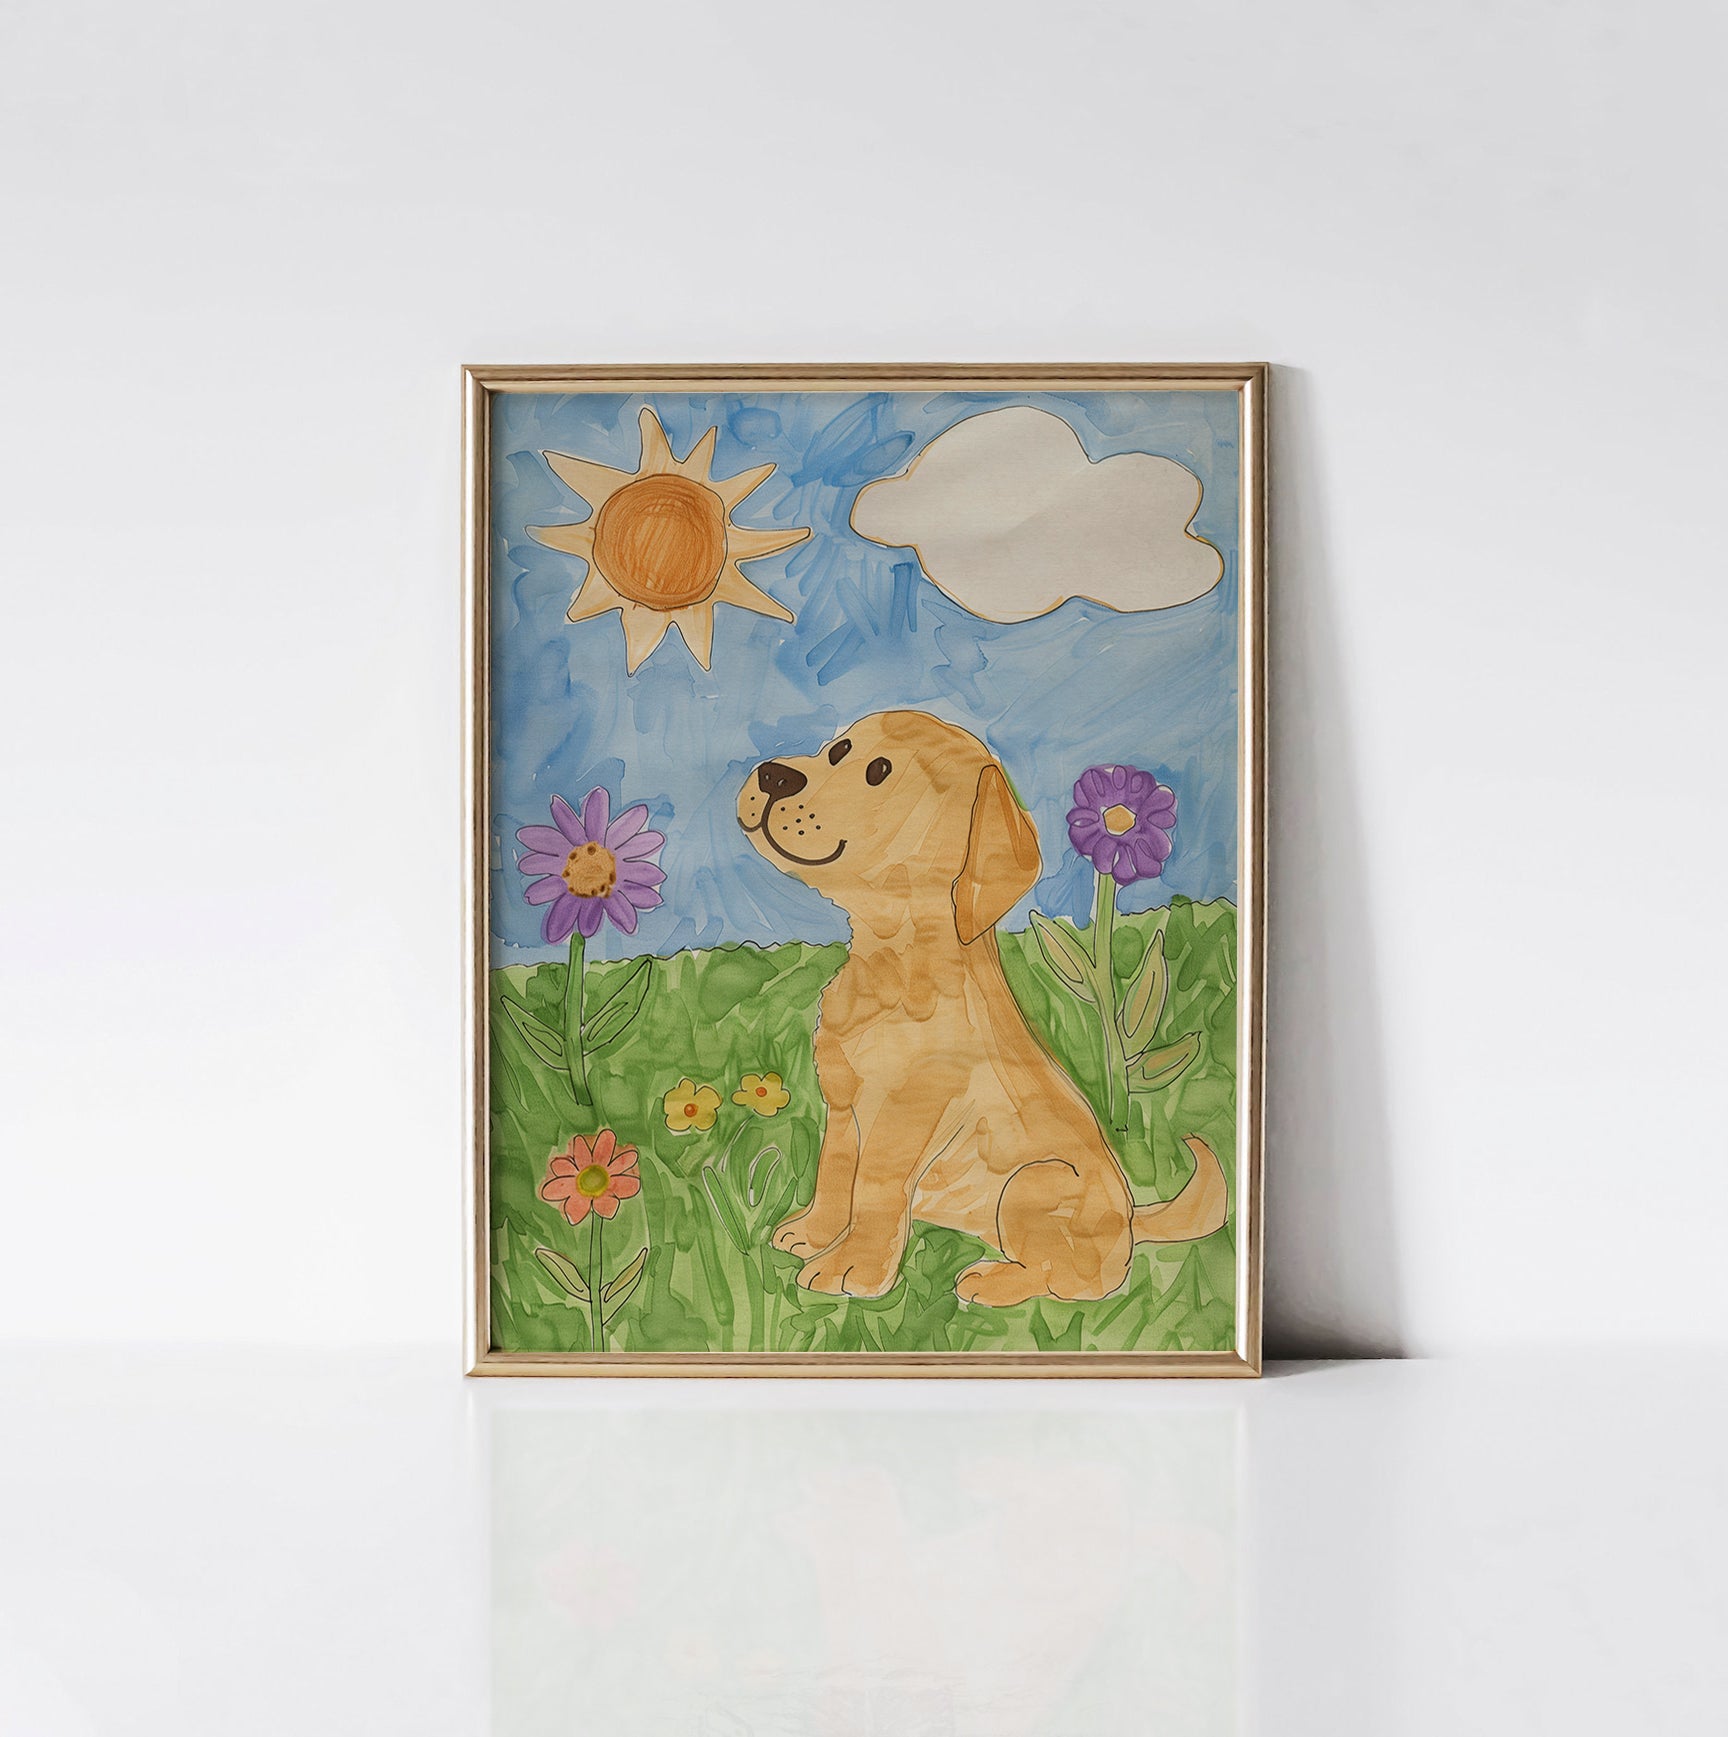 Sunshine Puppy Art Print from Timberlea Interiors Kids Art Print Collection displayed in a gold frame, showcasing a playful puppy in a colorful meadow with a bright sun overhead.